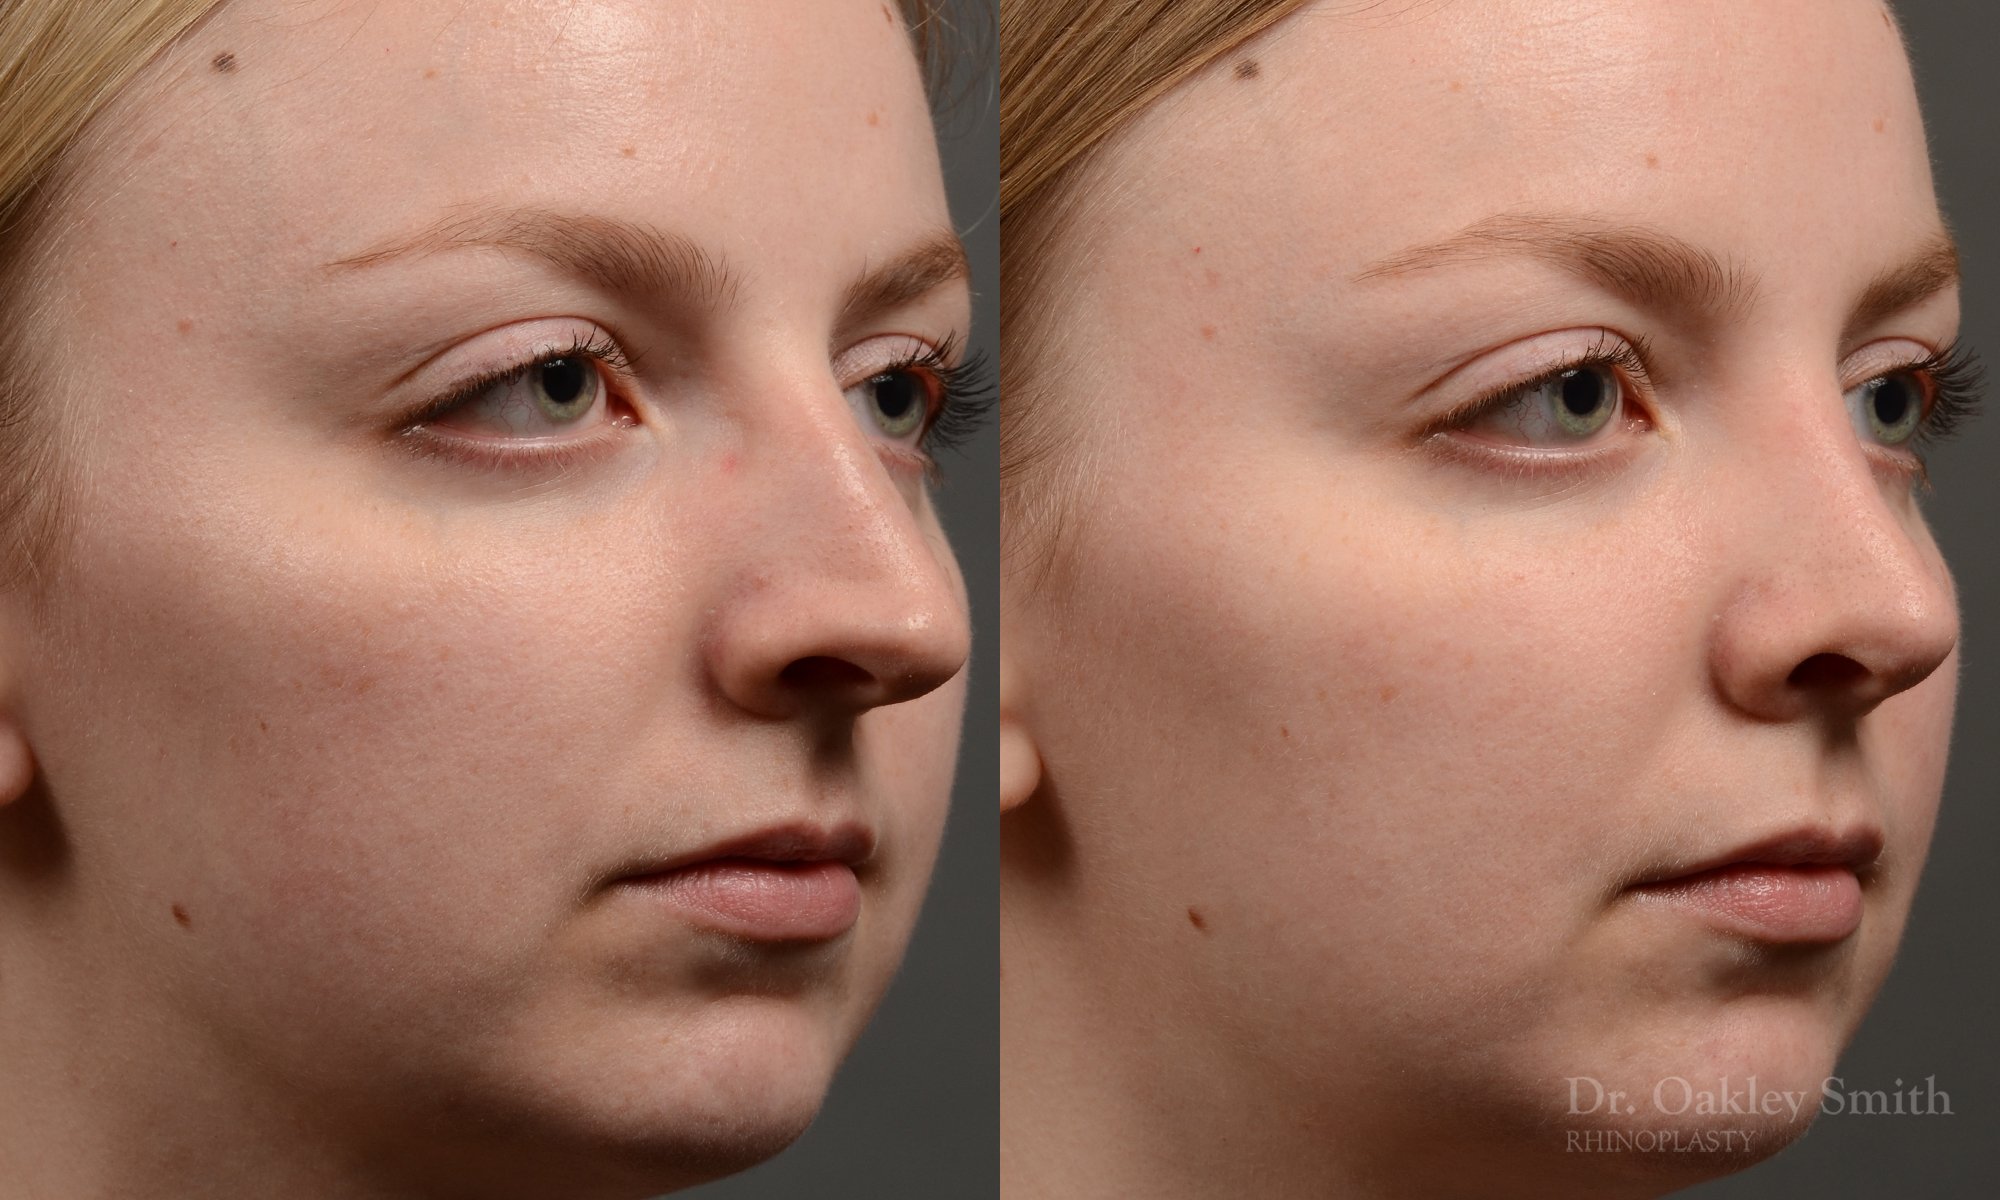 406 - Expert Rhinoplasty nose job surgery to reduce the bump on this womans nose.